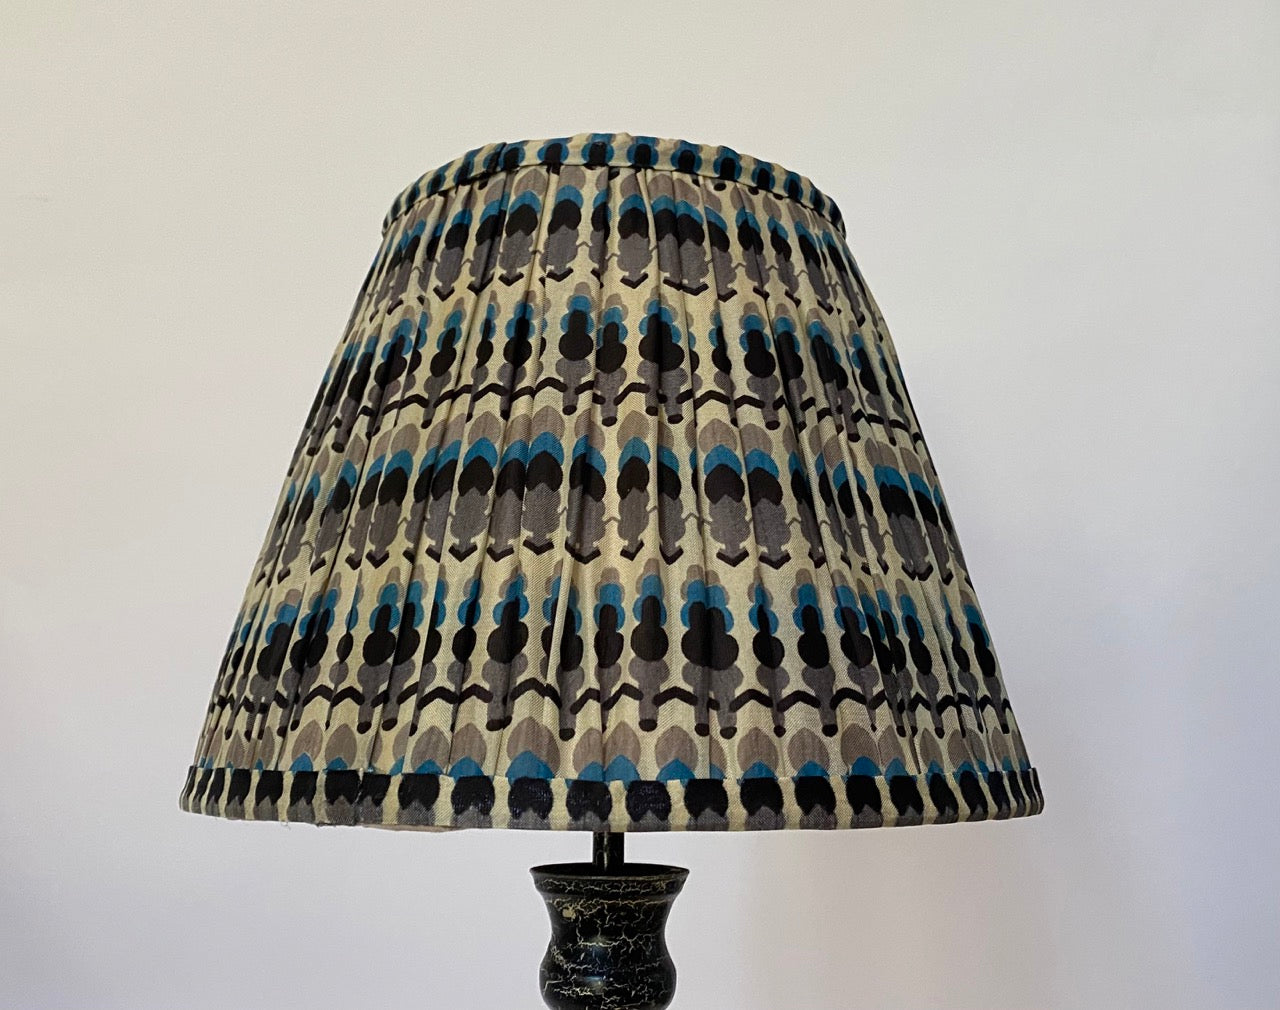 Black and blue silk lampshade